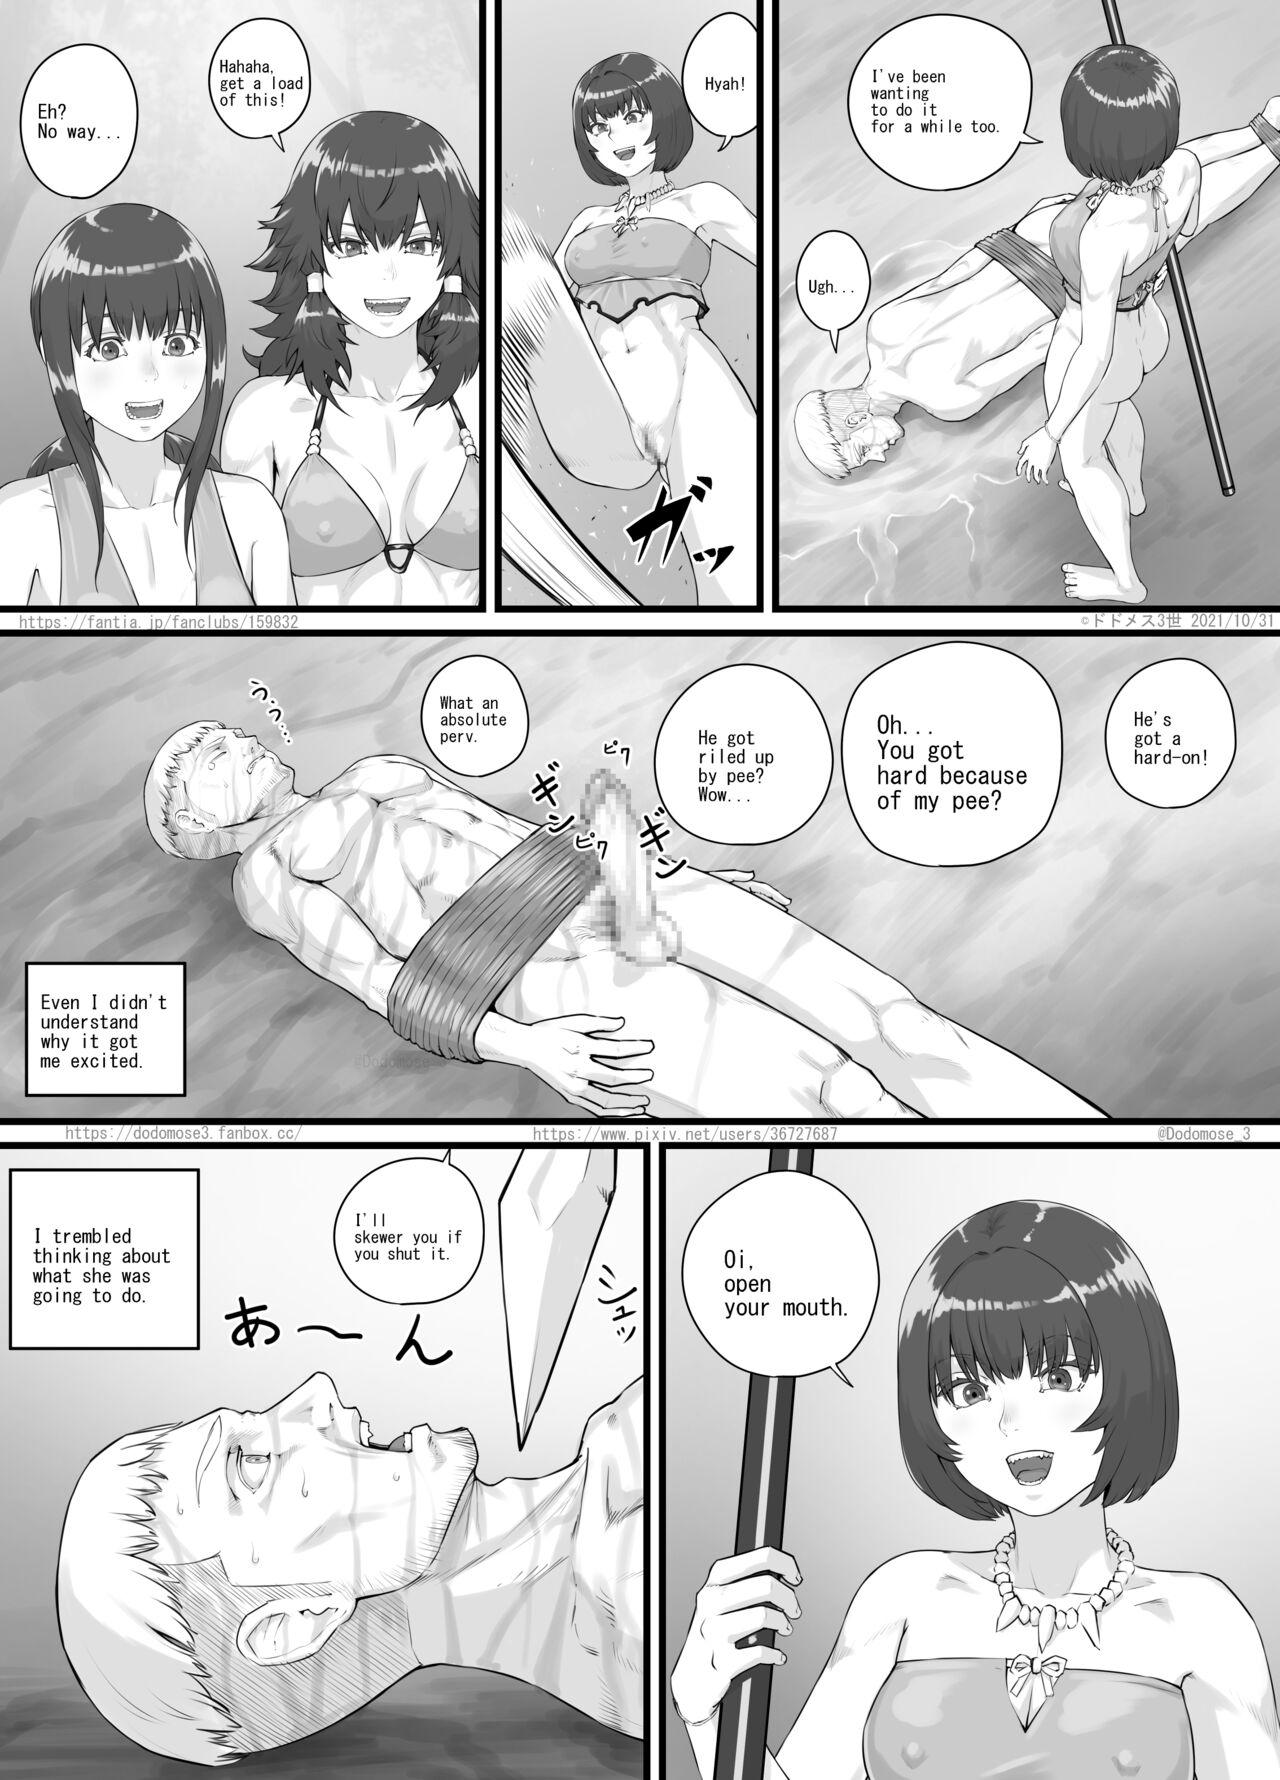 Suck Cock アマゾネス漫画（English Version） - Original Farting - Page 11